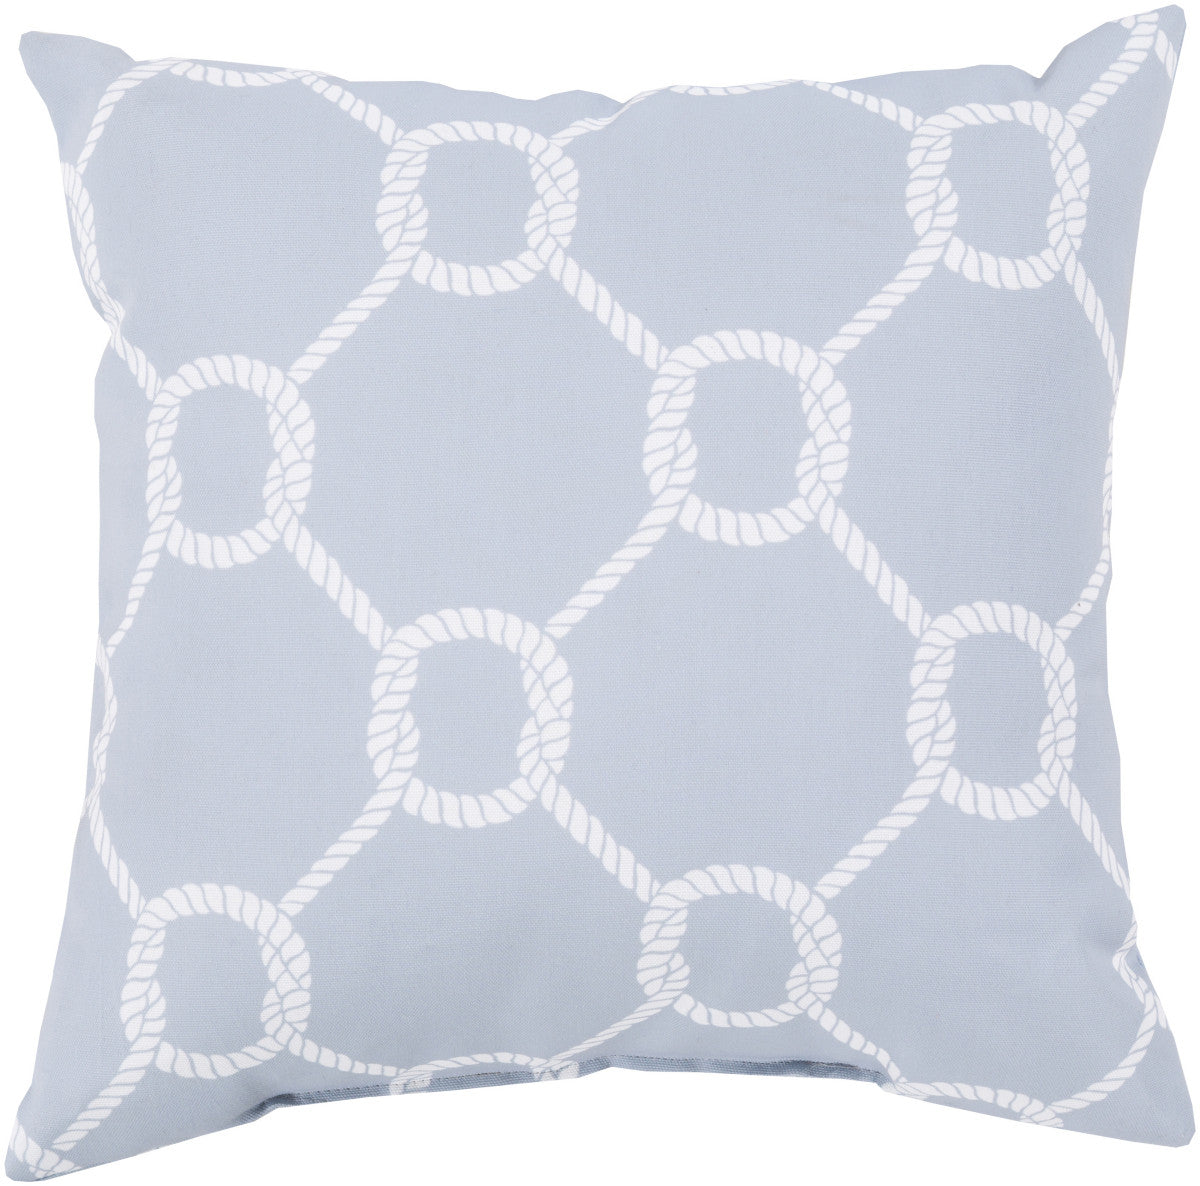 Surya Rain Tied up in Delight RG-148 Pillow